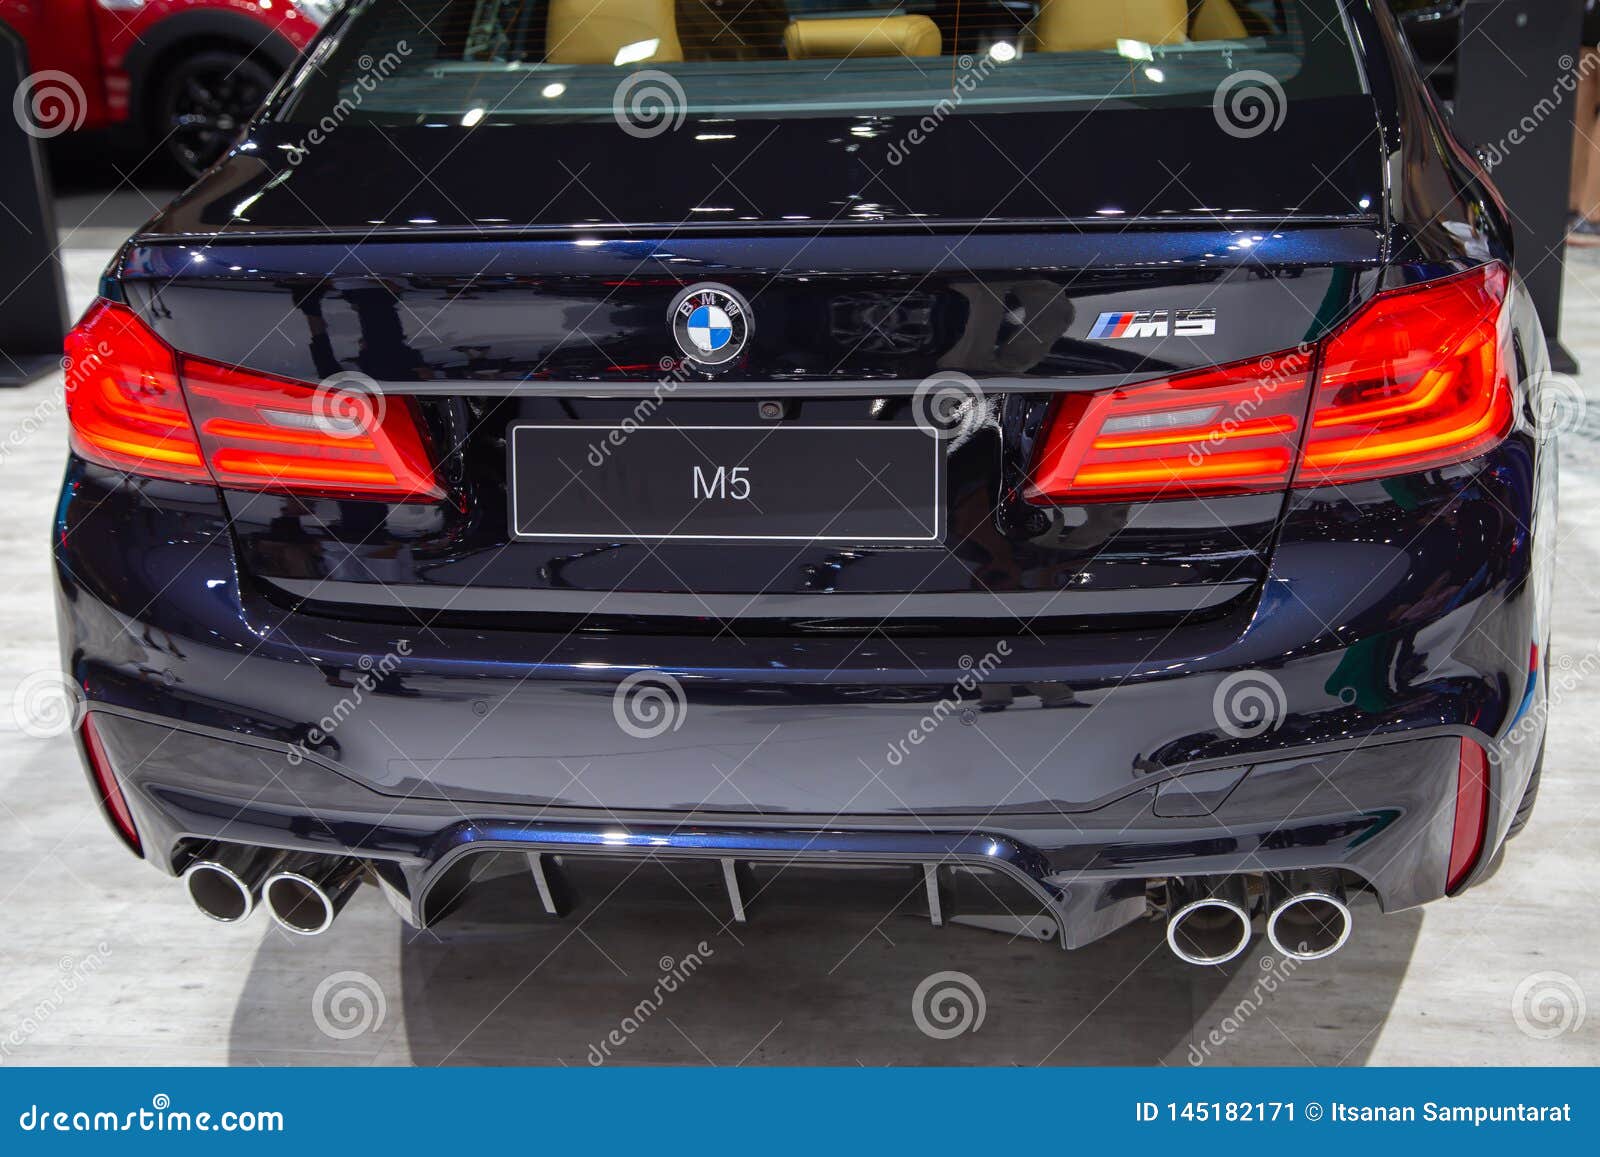 Bmw M5 Mpower Editorial Photo Image Of Display Power